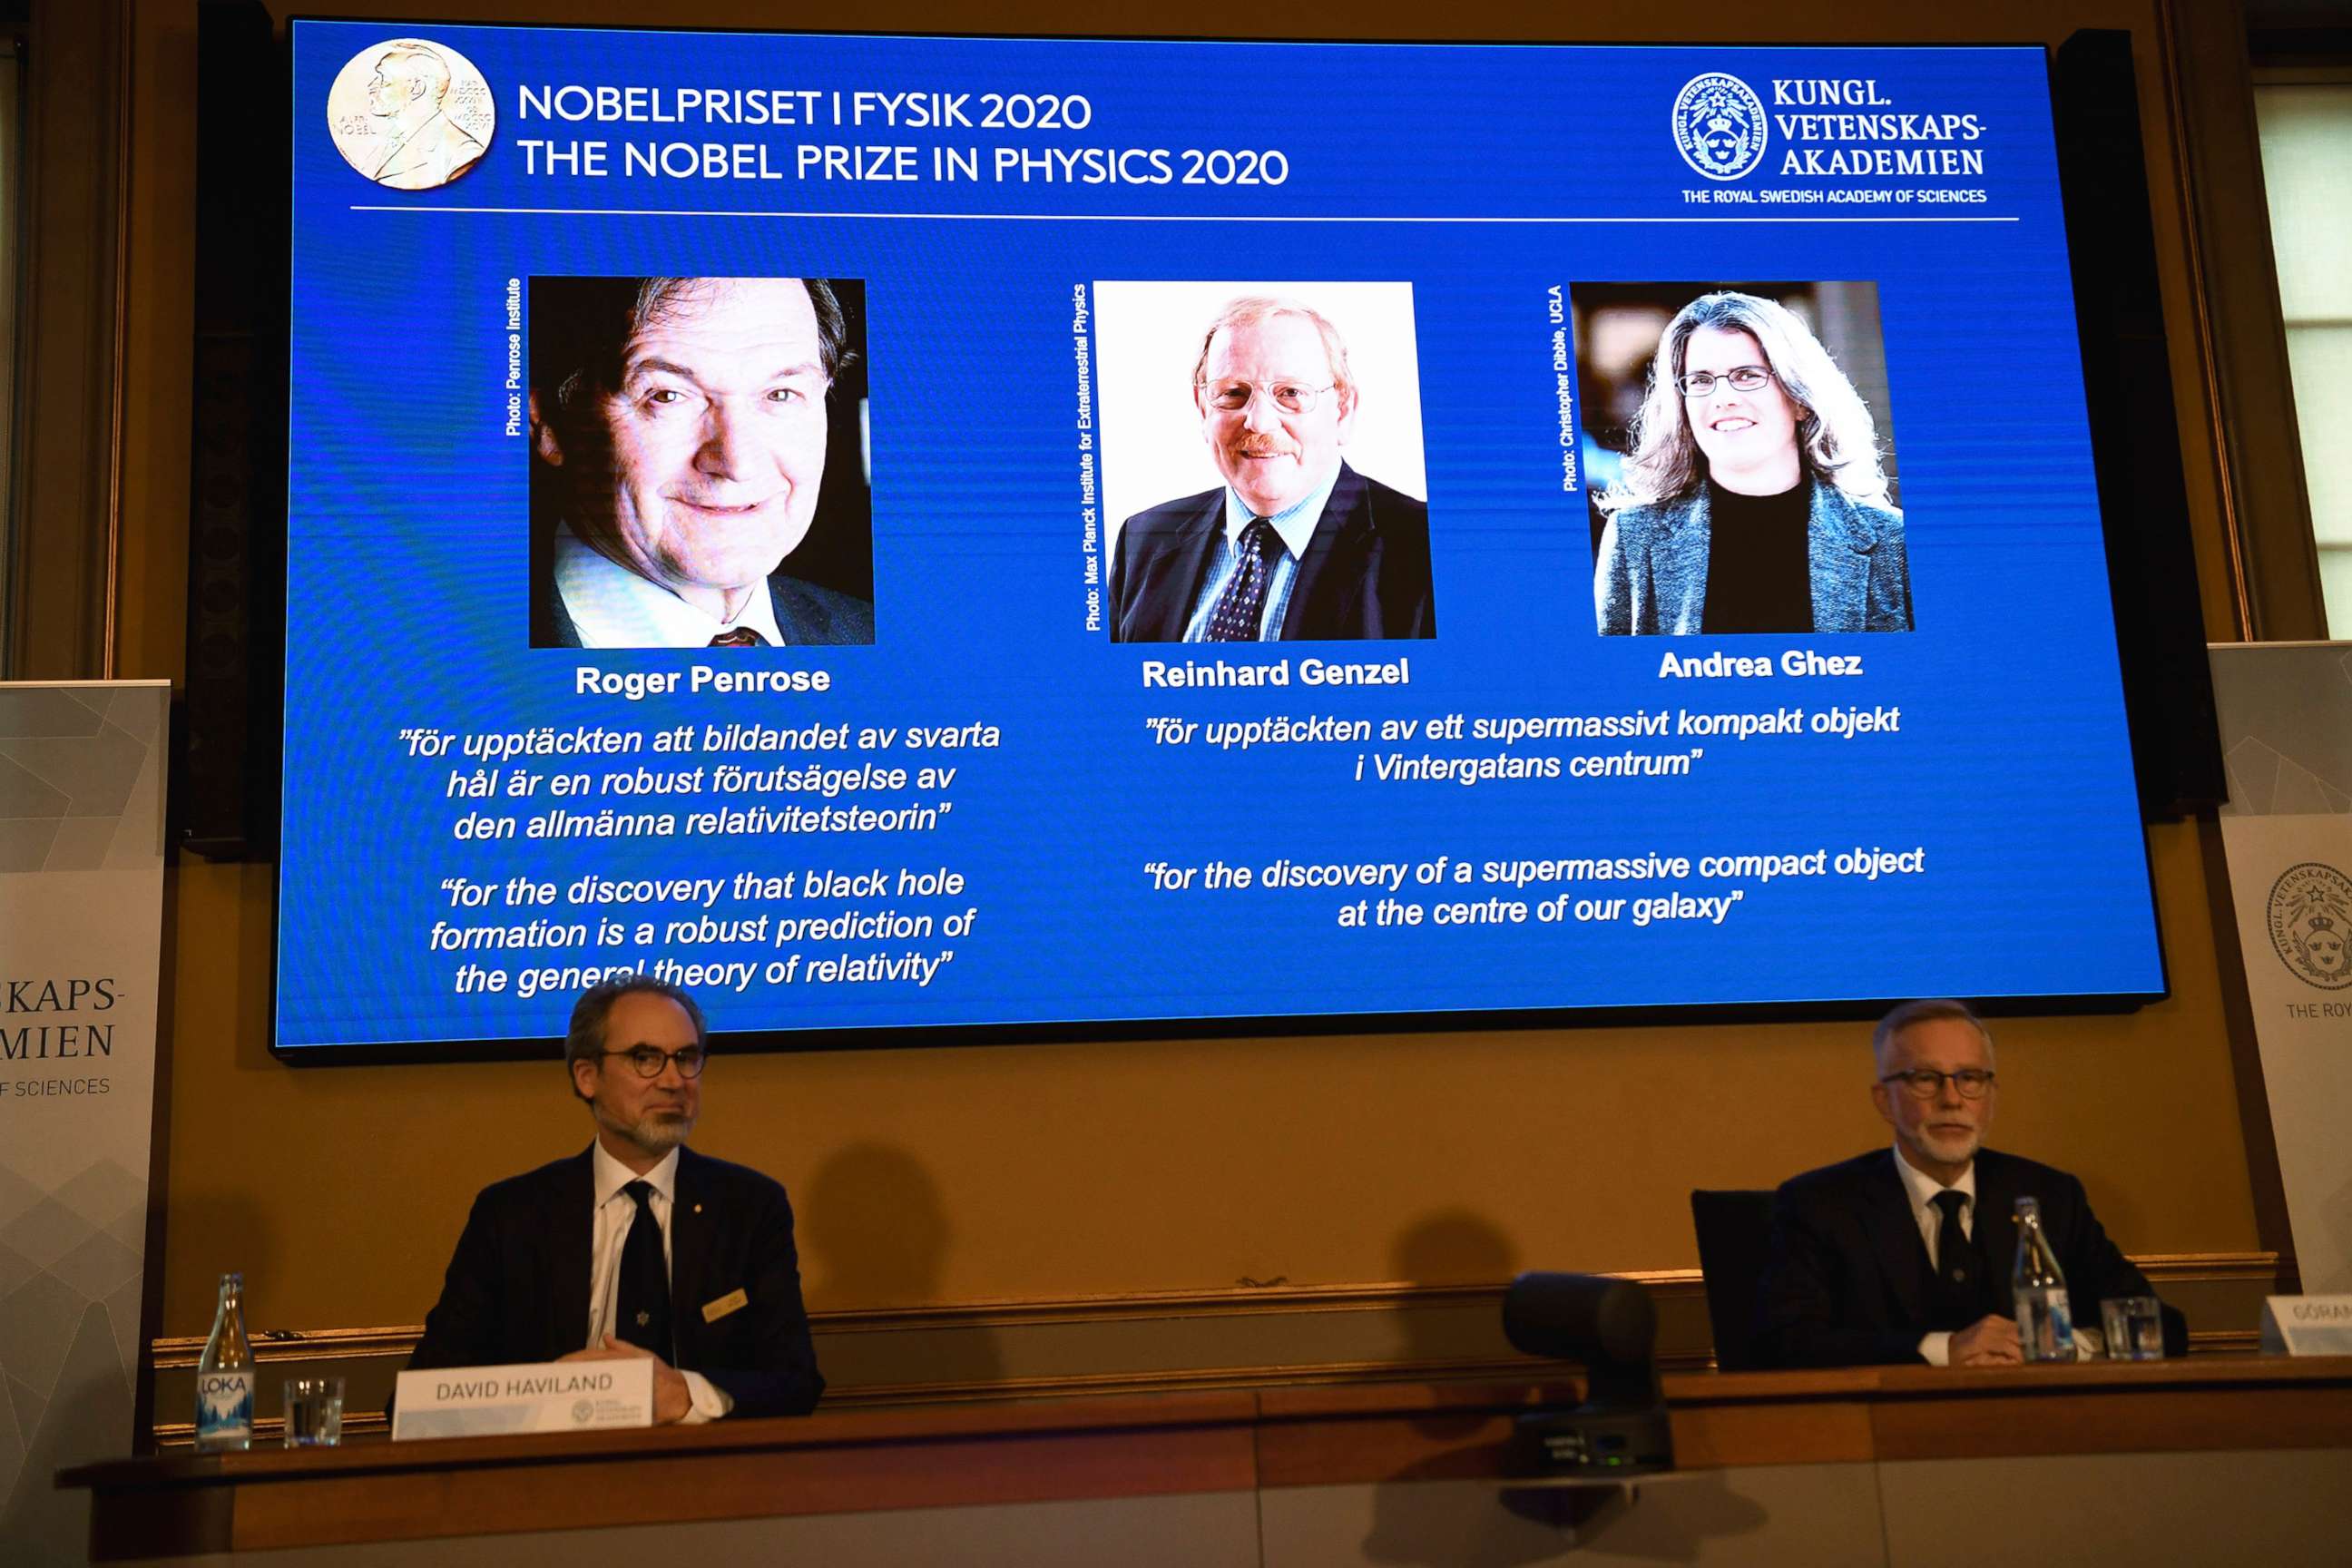 PHOTO: The winners of the 2020 Nobel Prize in Physics are announced during a news conference at the Royal Swedish Academy of Sciences, in Stockholm, Oct. 6, 2020.